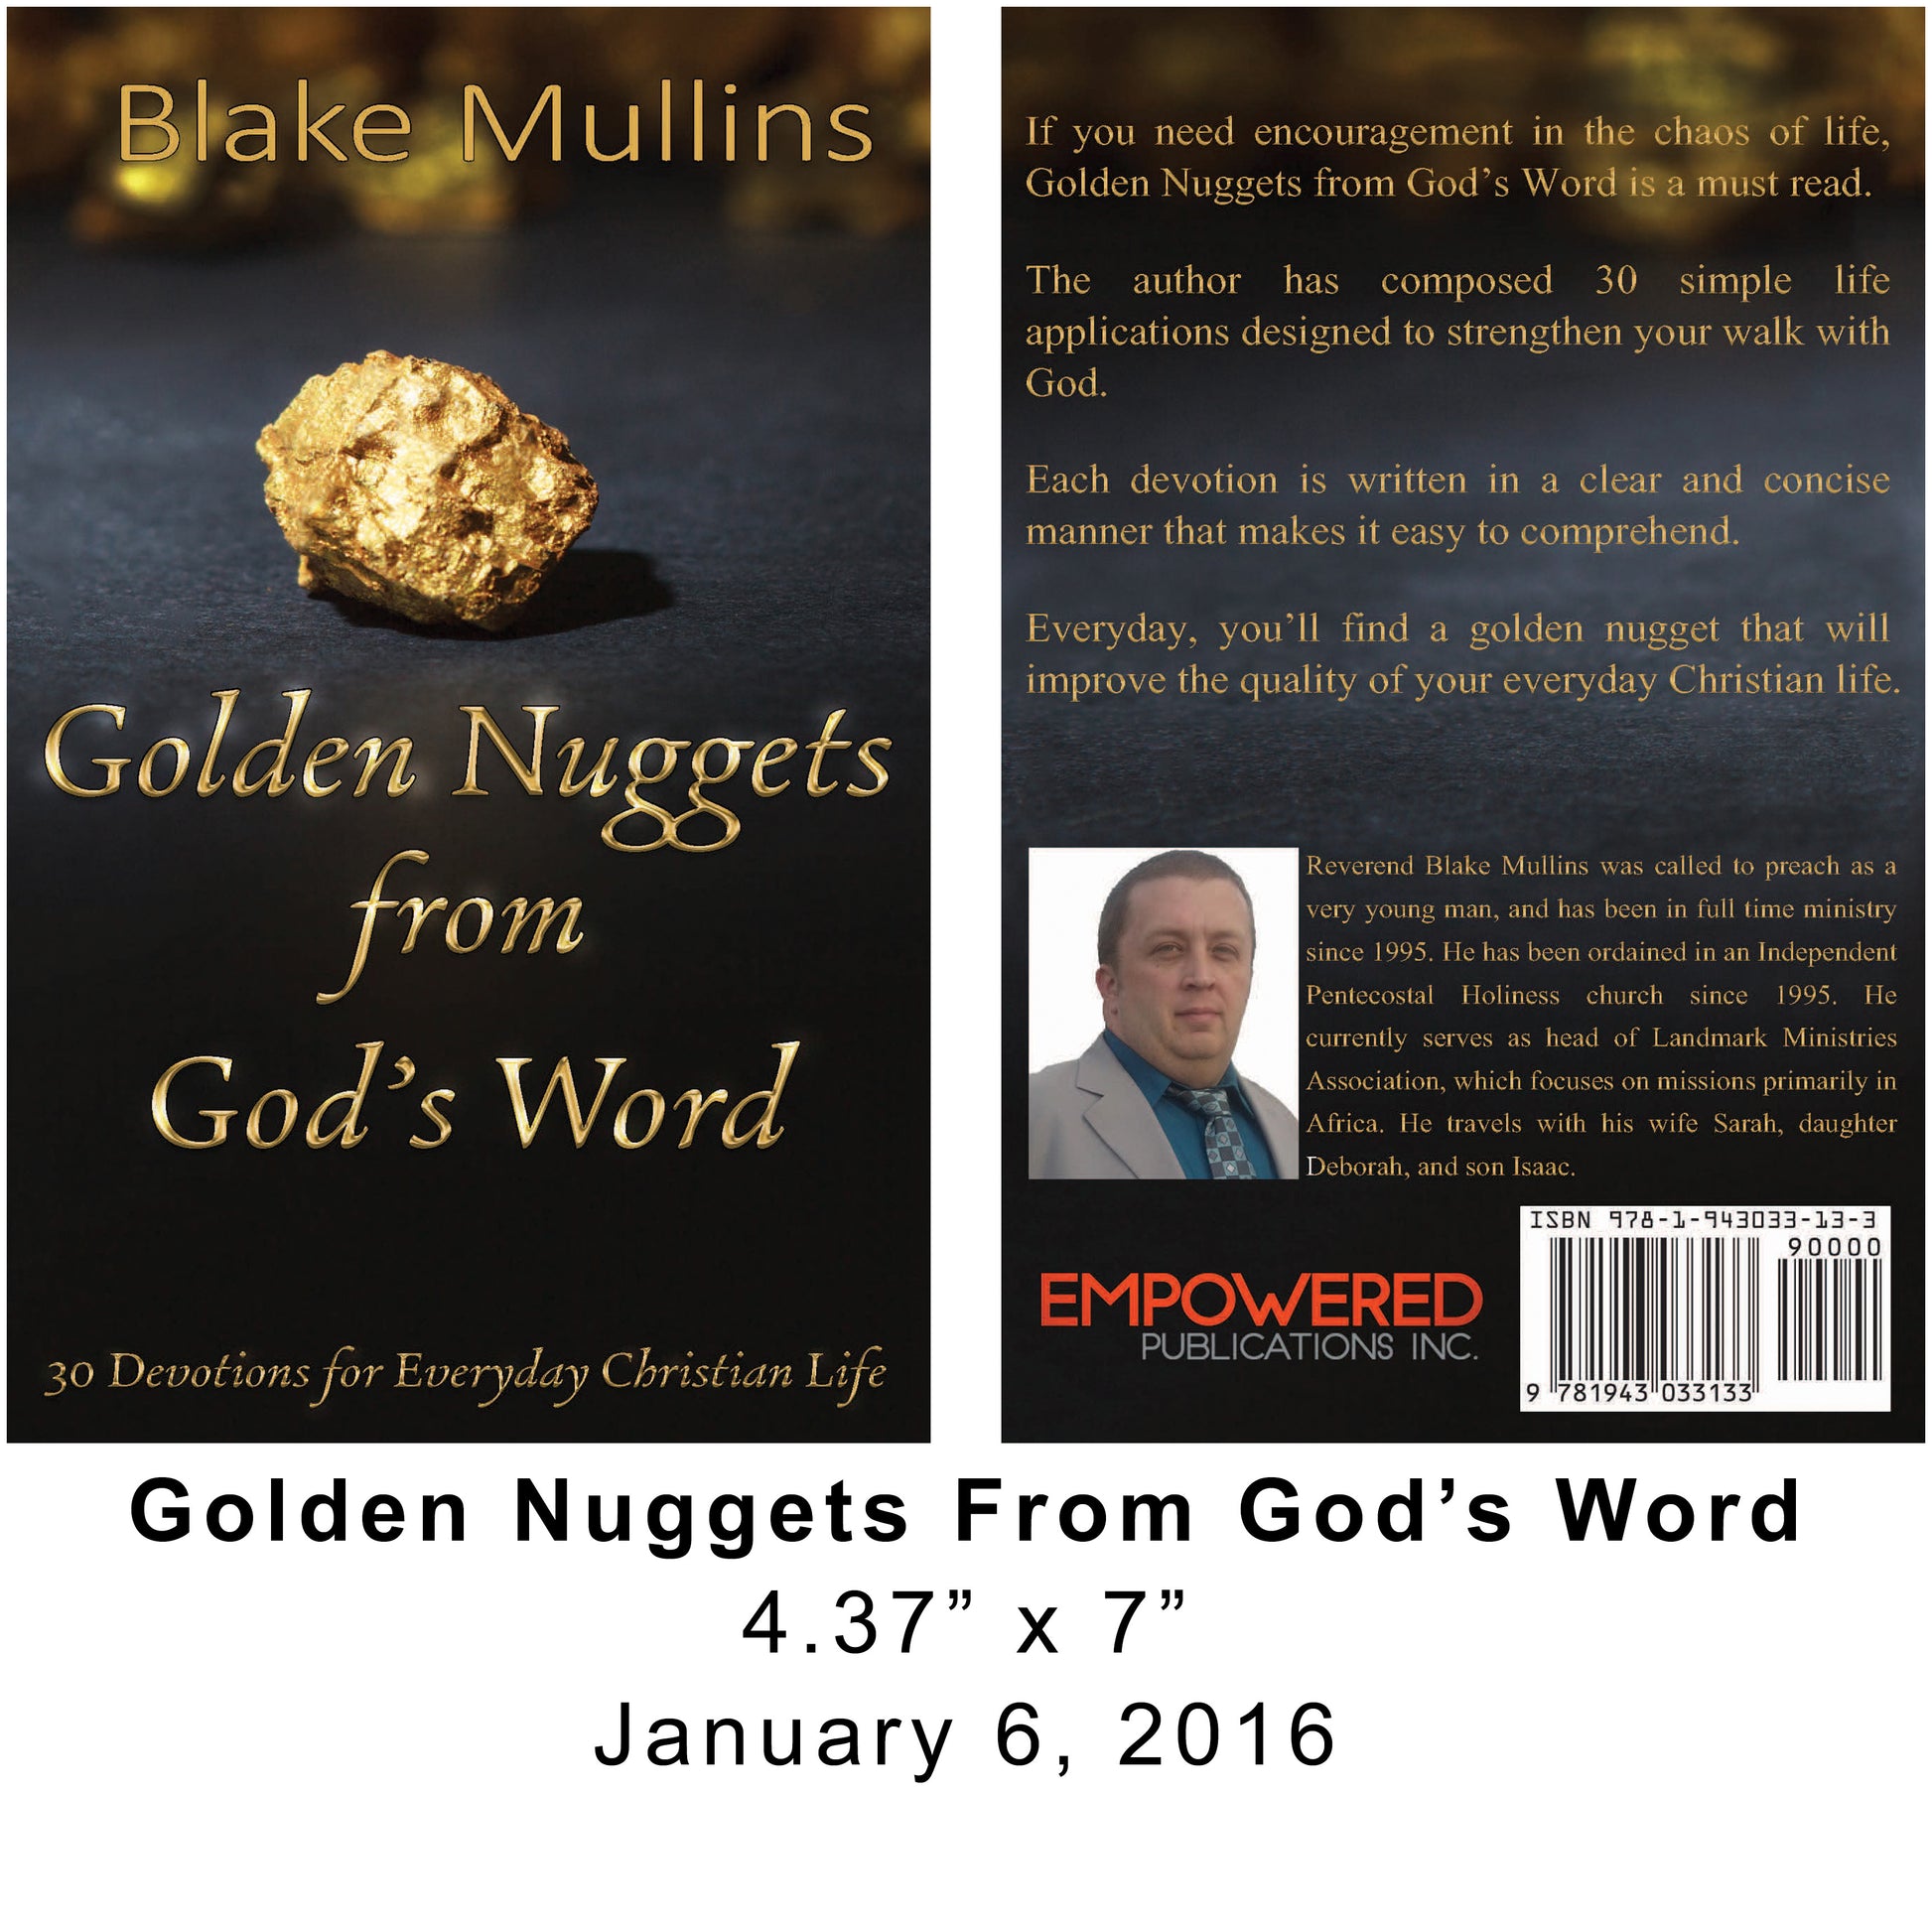 Golden Nuggets from God's Word by Blake Mullins. A 30 day devotional.